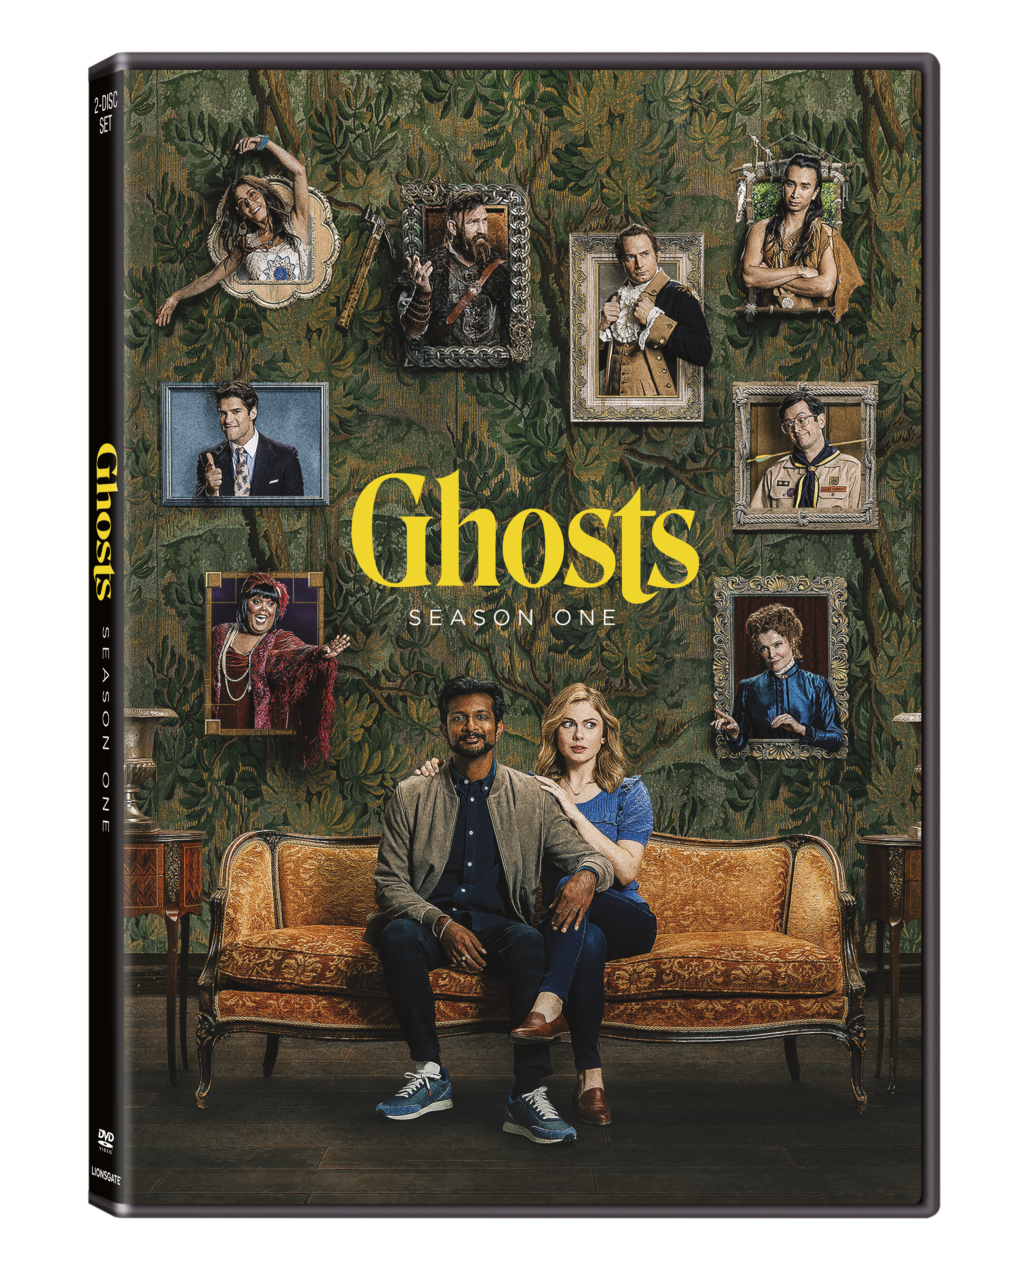 Ghosts Season One DVD cover (Lionsgate/CBS)